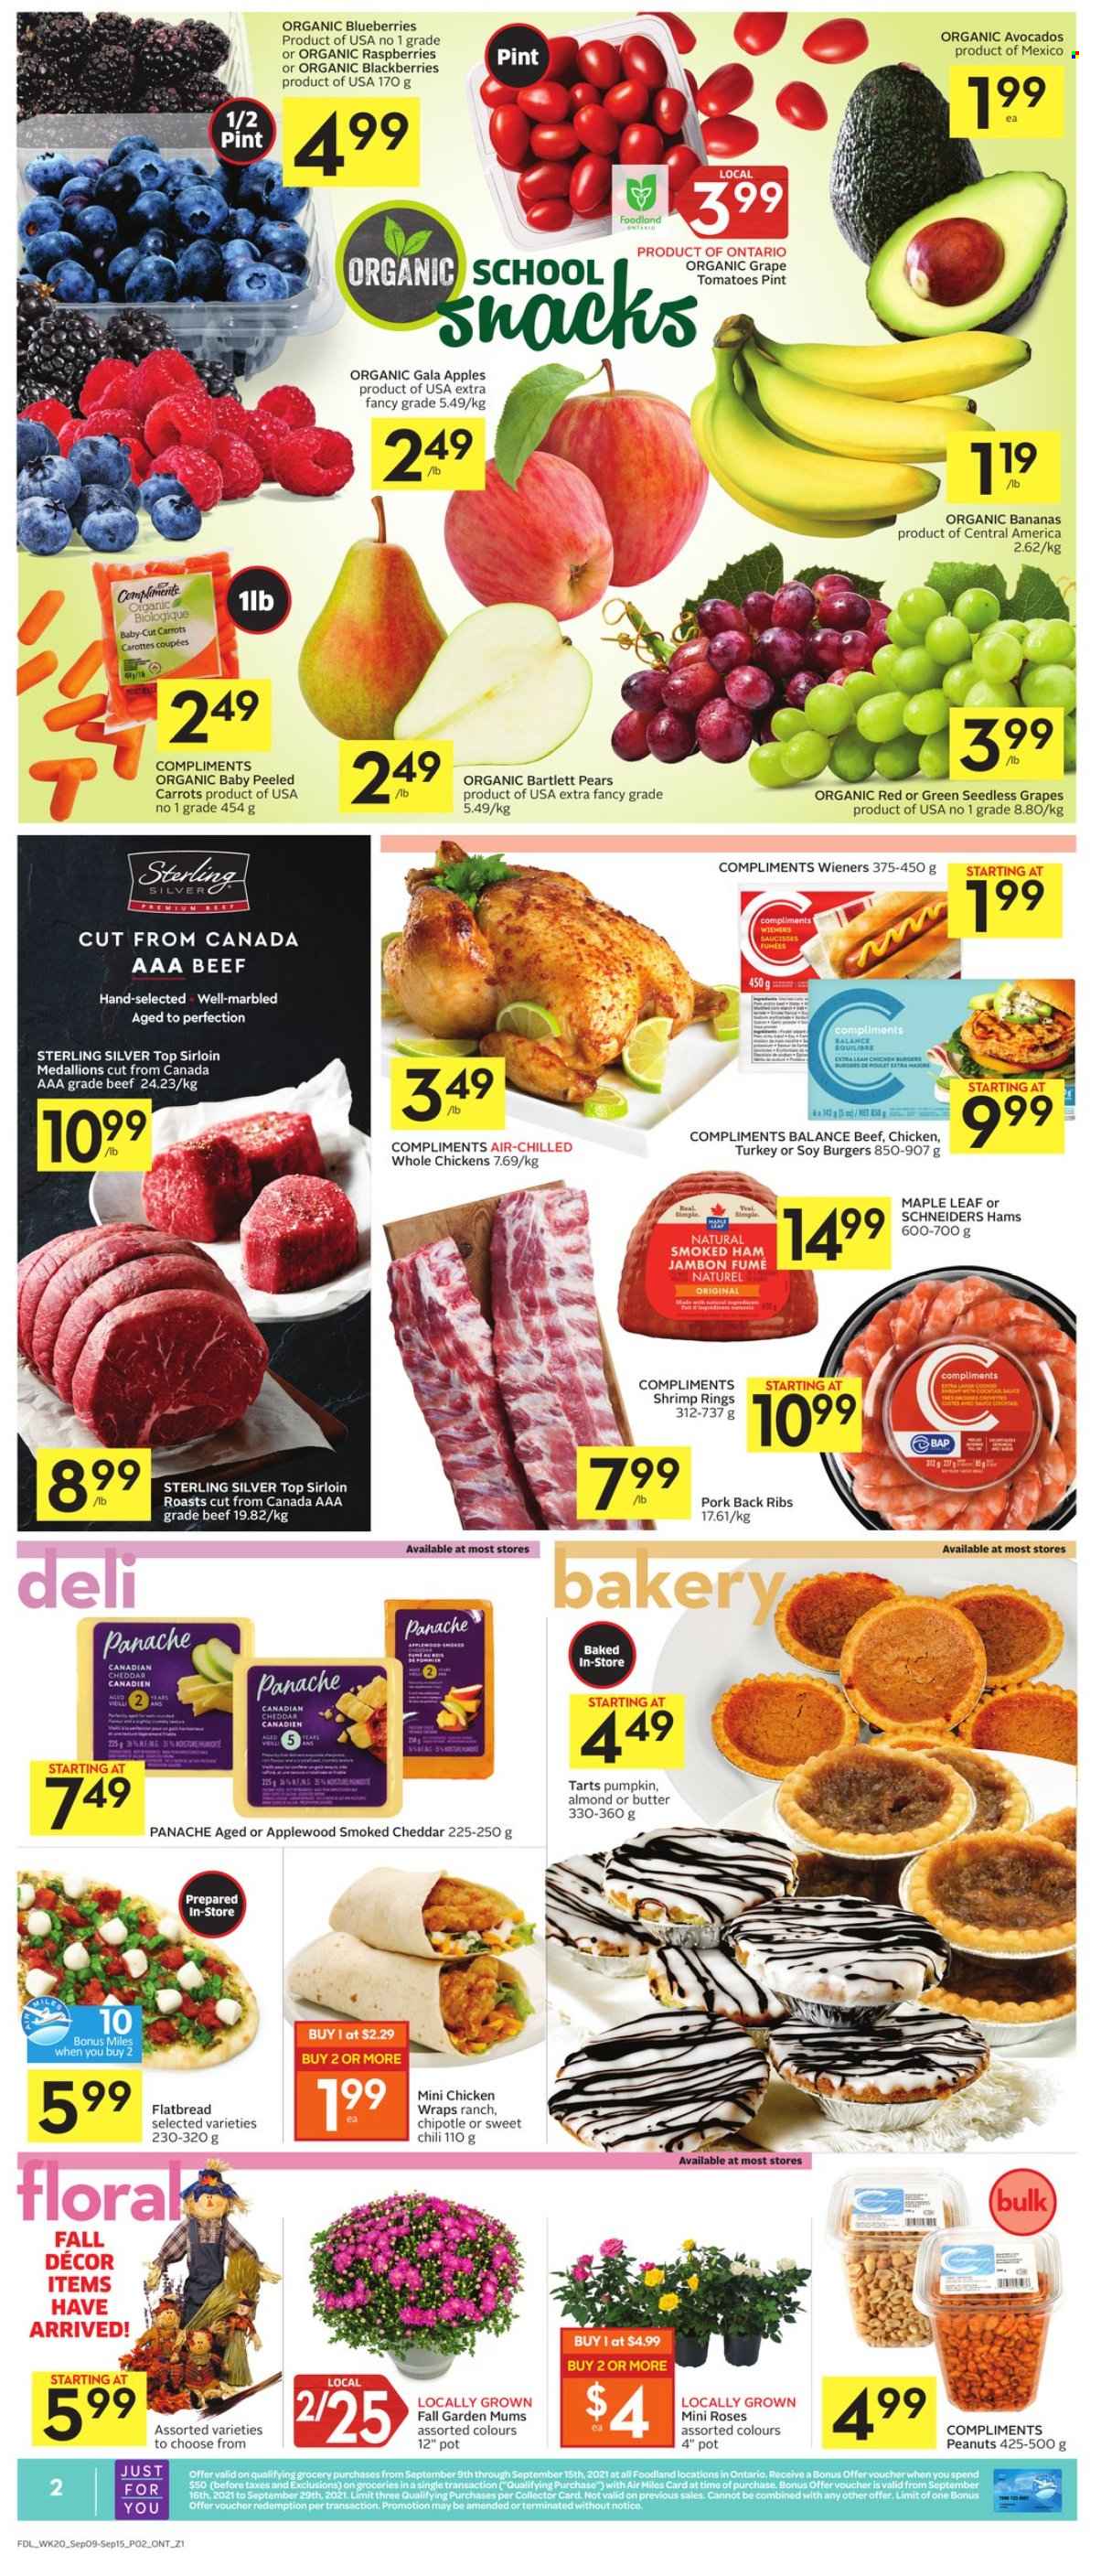 thumbnail - Foodland Flyer - September 09, 2021 - September 15, 2021 - Sales products - flatbread, wraps, carrots, tomatoes, apples, avocado, bananas, Bartlett pears, blackberries, Gala, seedless grapes, pears, organic bananas, shrimps, hamburger, ham, smoked ham, cheddar, cheese, butter, snack, peanuts, whole chicken, pork meat, pork ribs, pork back ribs. Page 2.